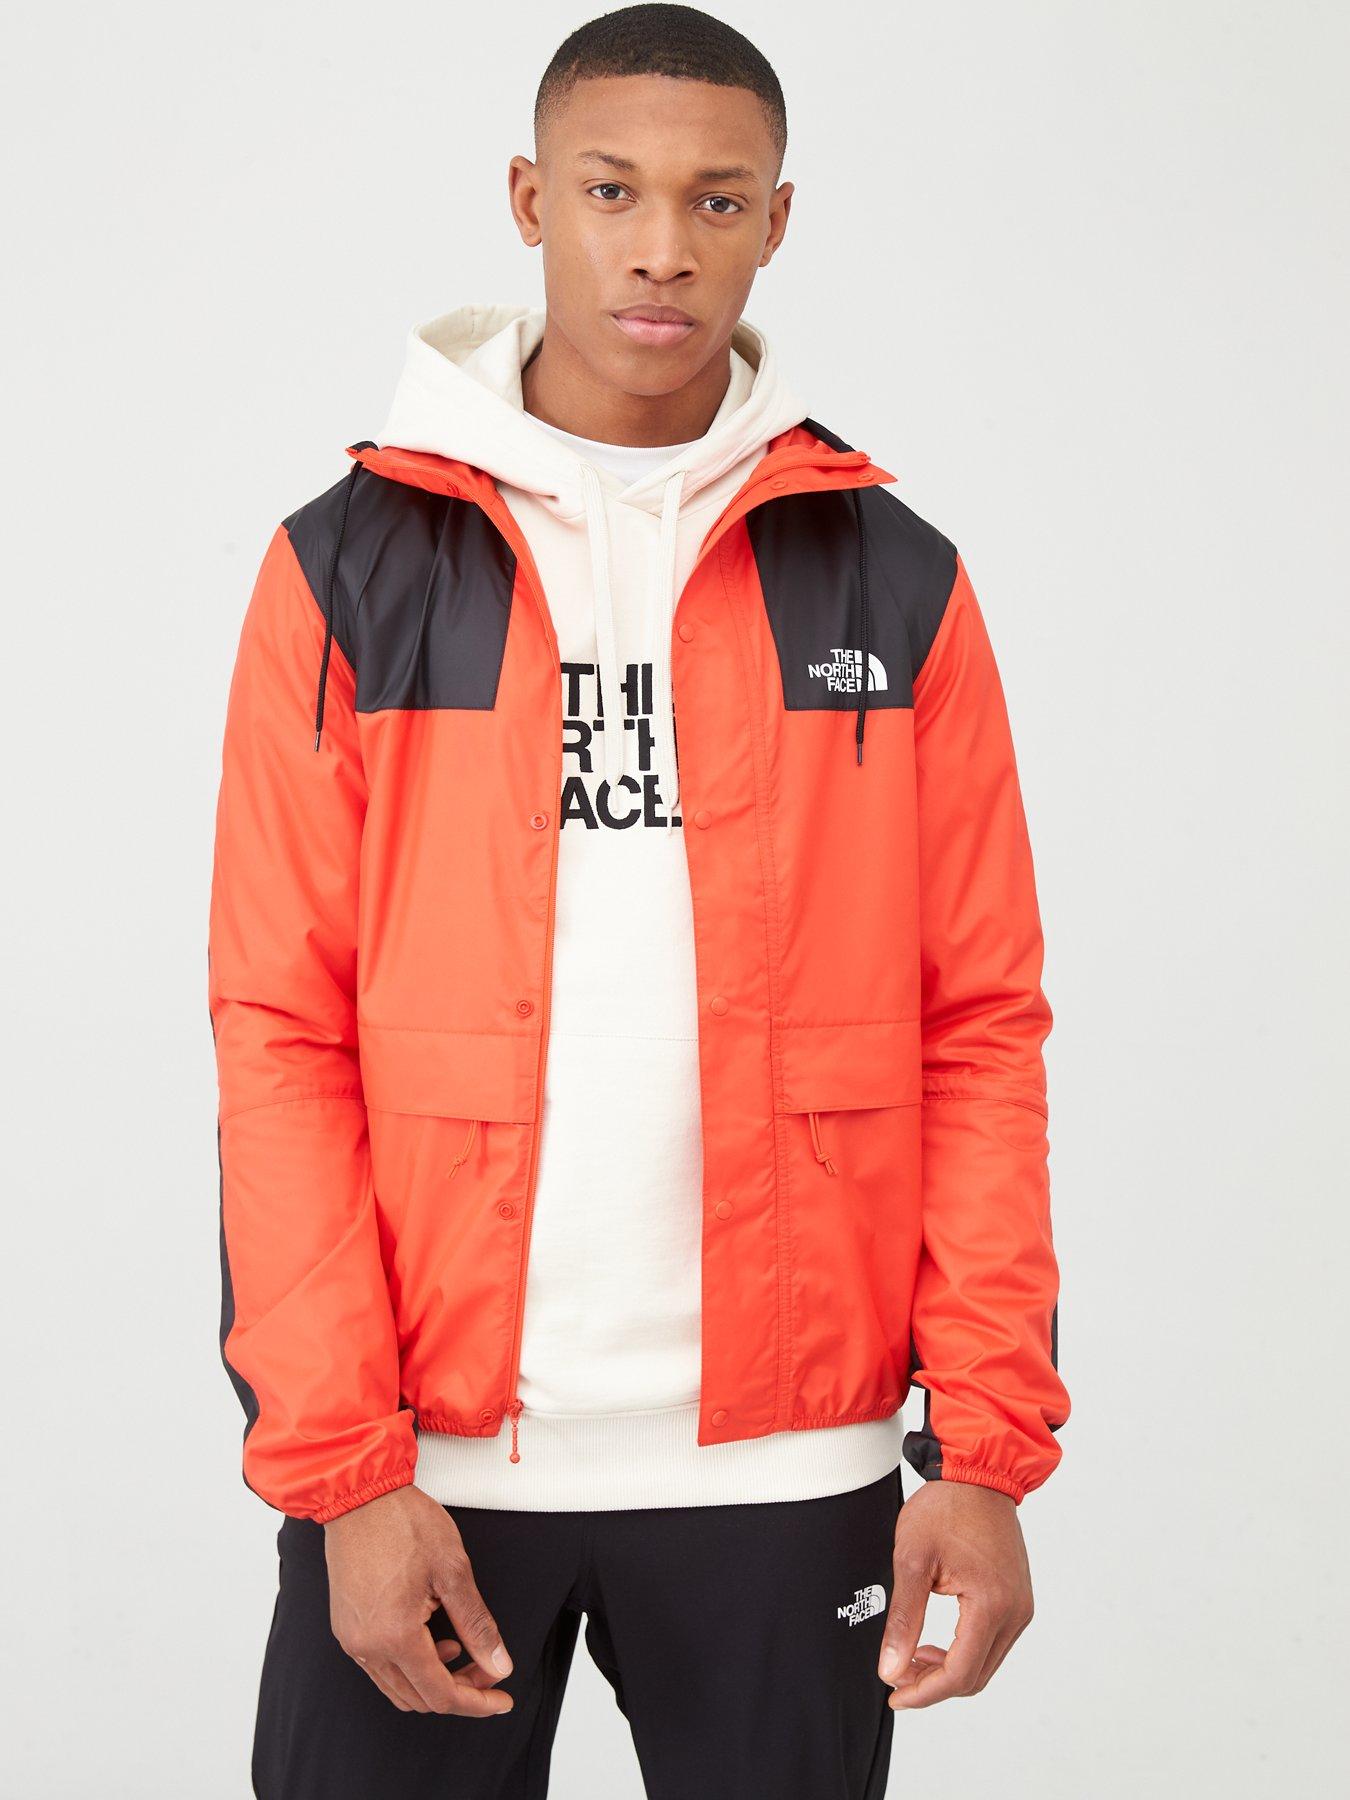 red black north face